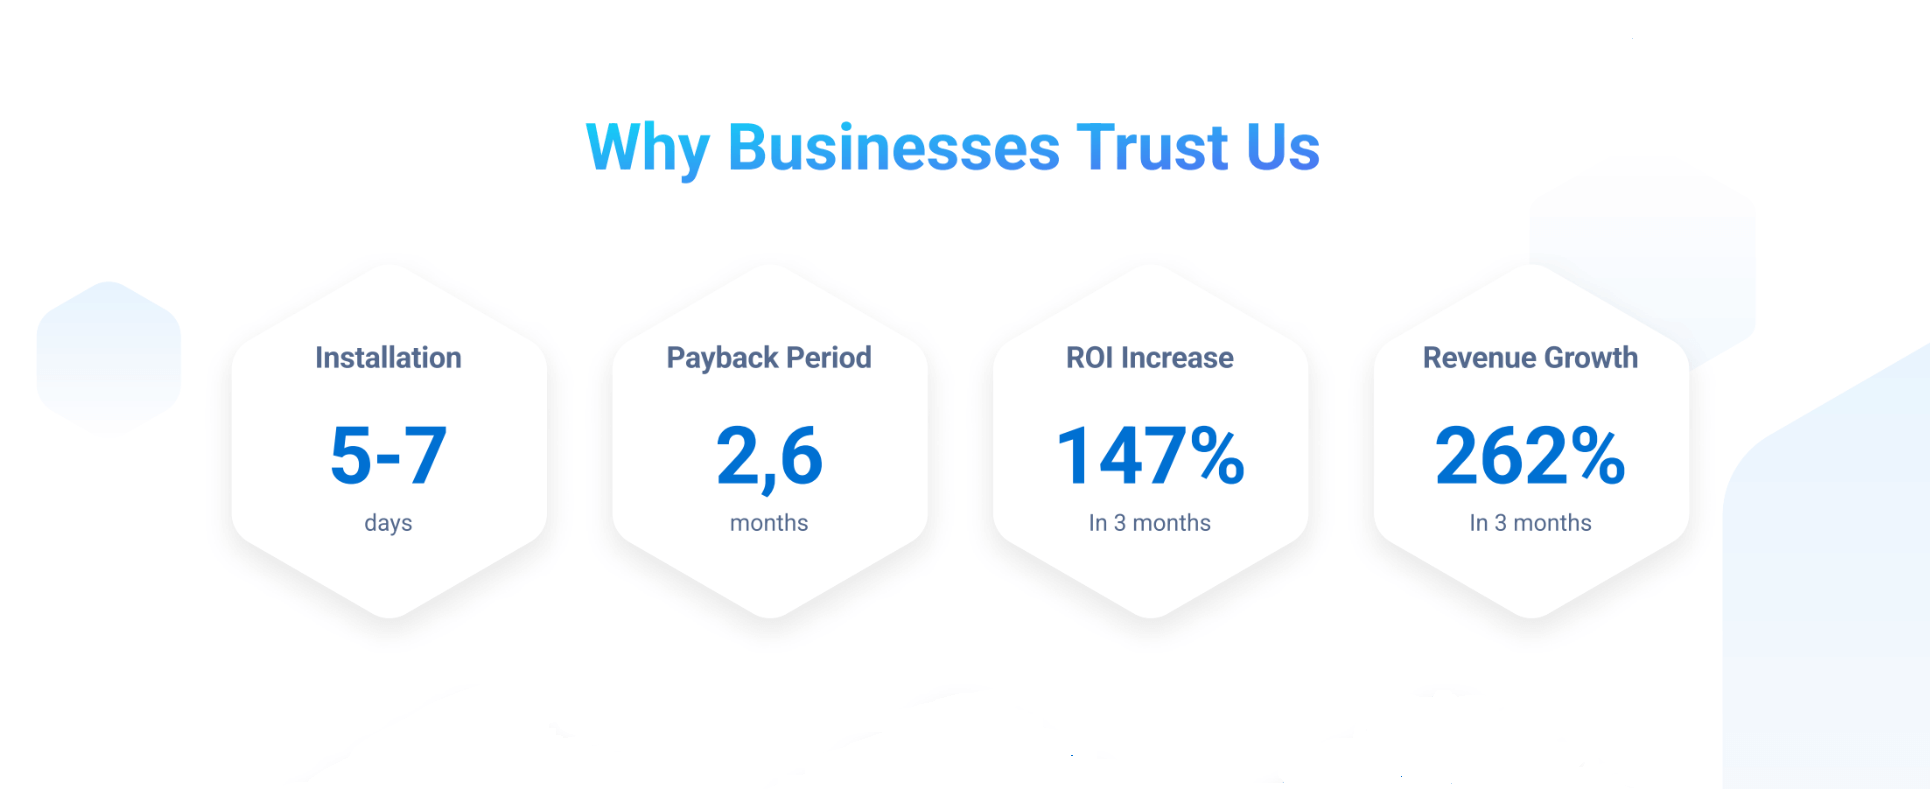 smarthub white label ad exchange - why businesses trust us